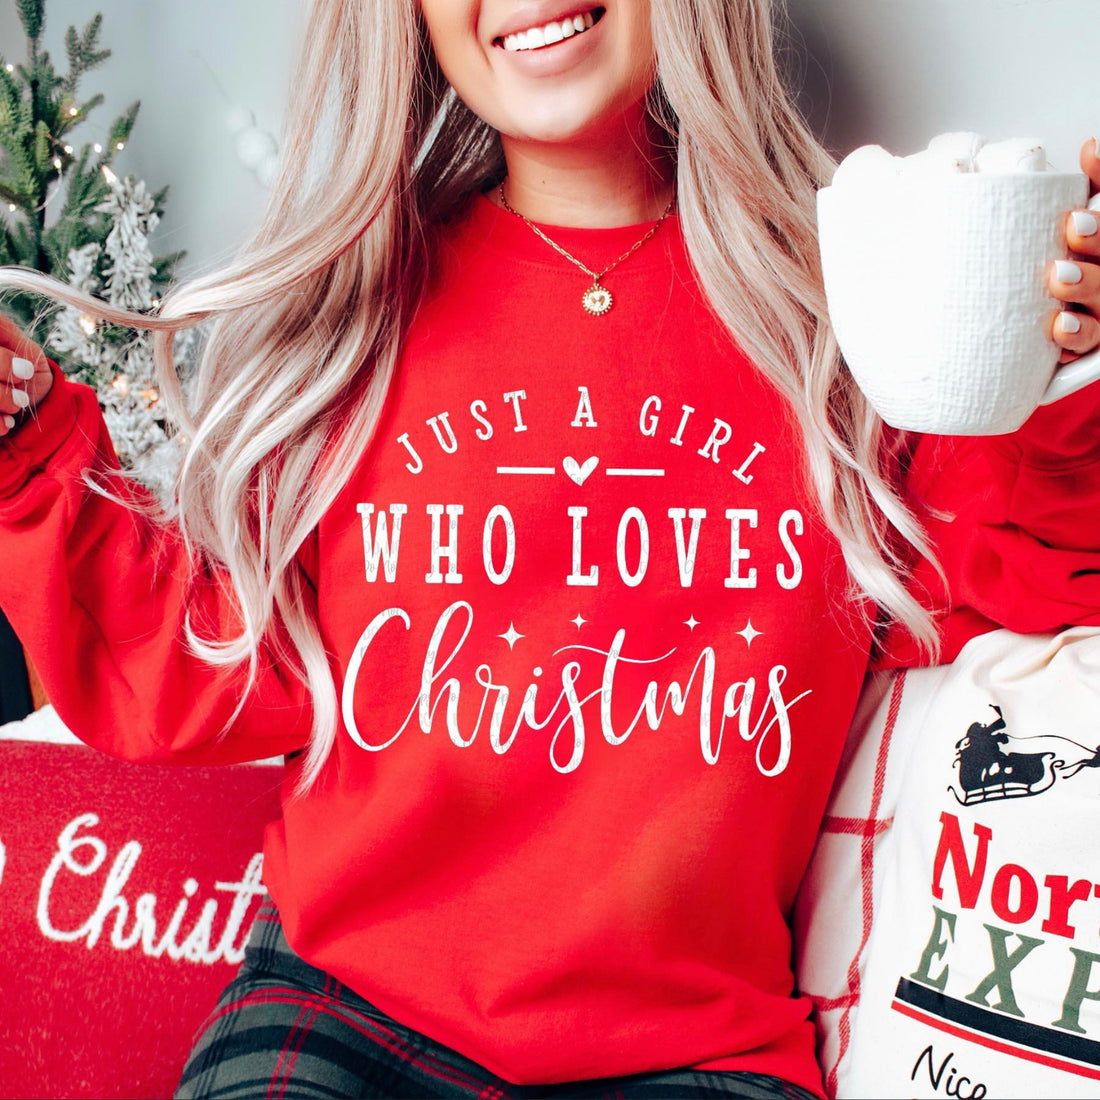 “Just A Girl Who Loves Christmas” Graphic Sweatshirt